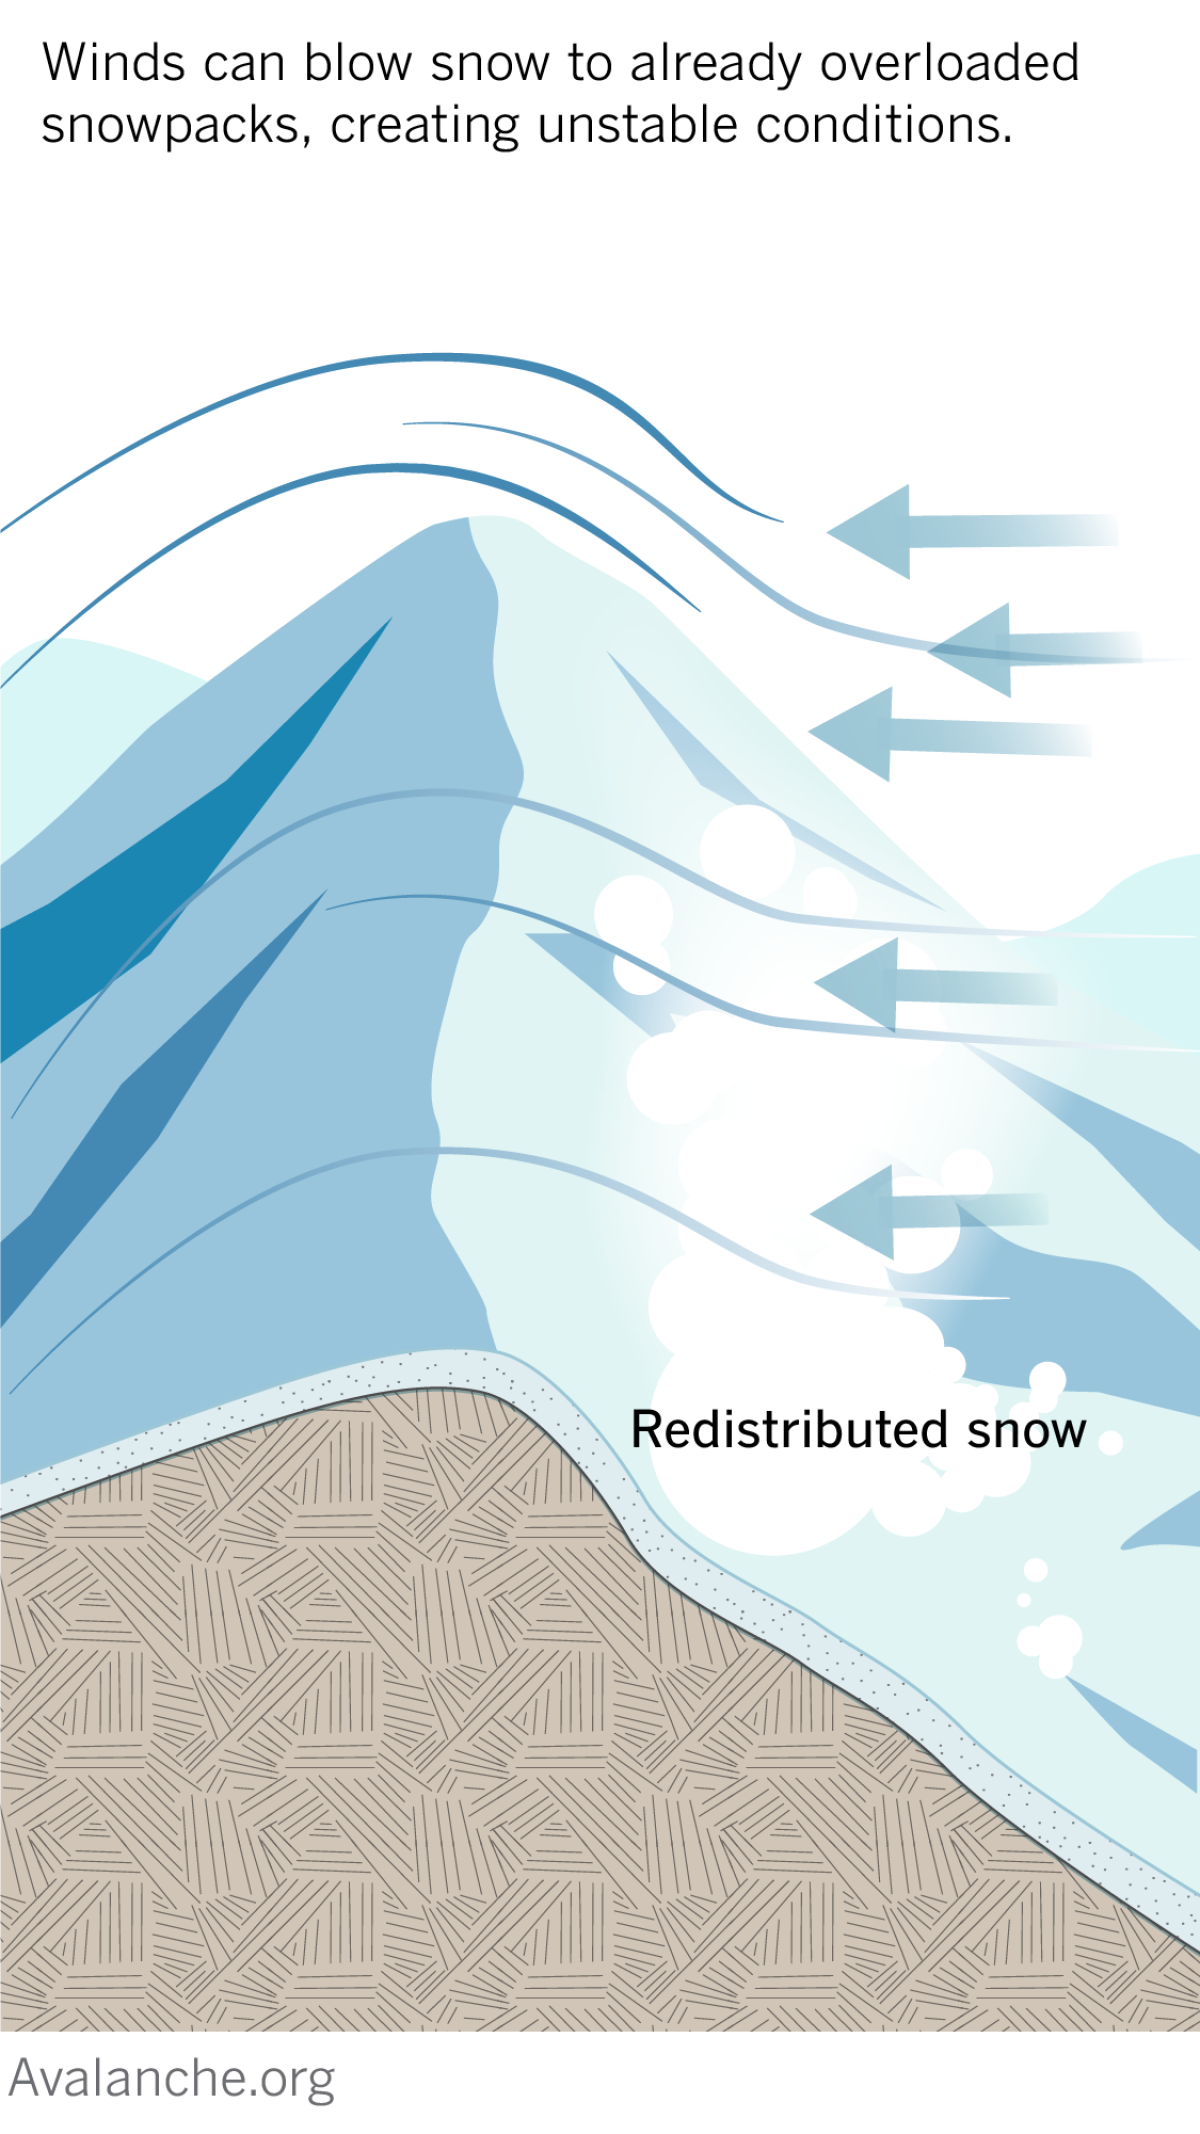 The diagram shows that winds can blow snow into already overloaded snowpacks, creating unstable conditions.